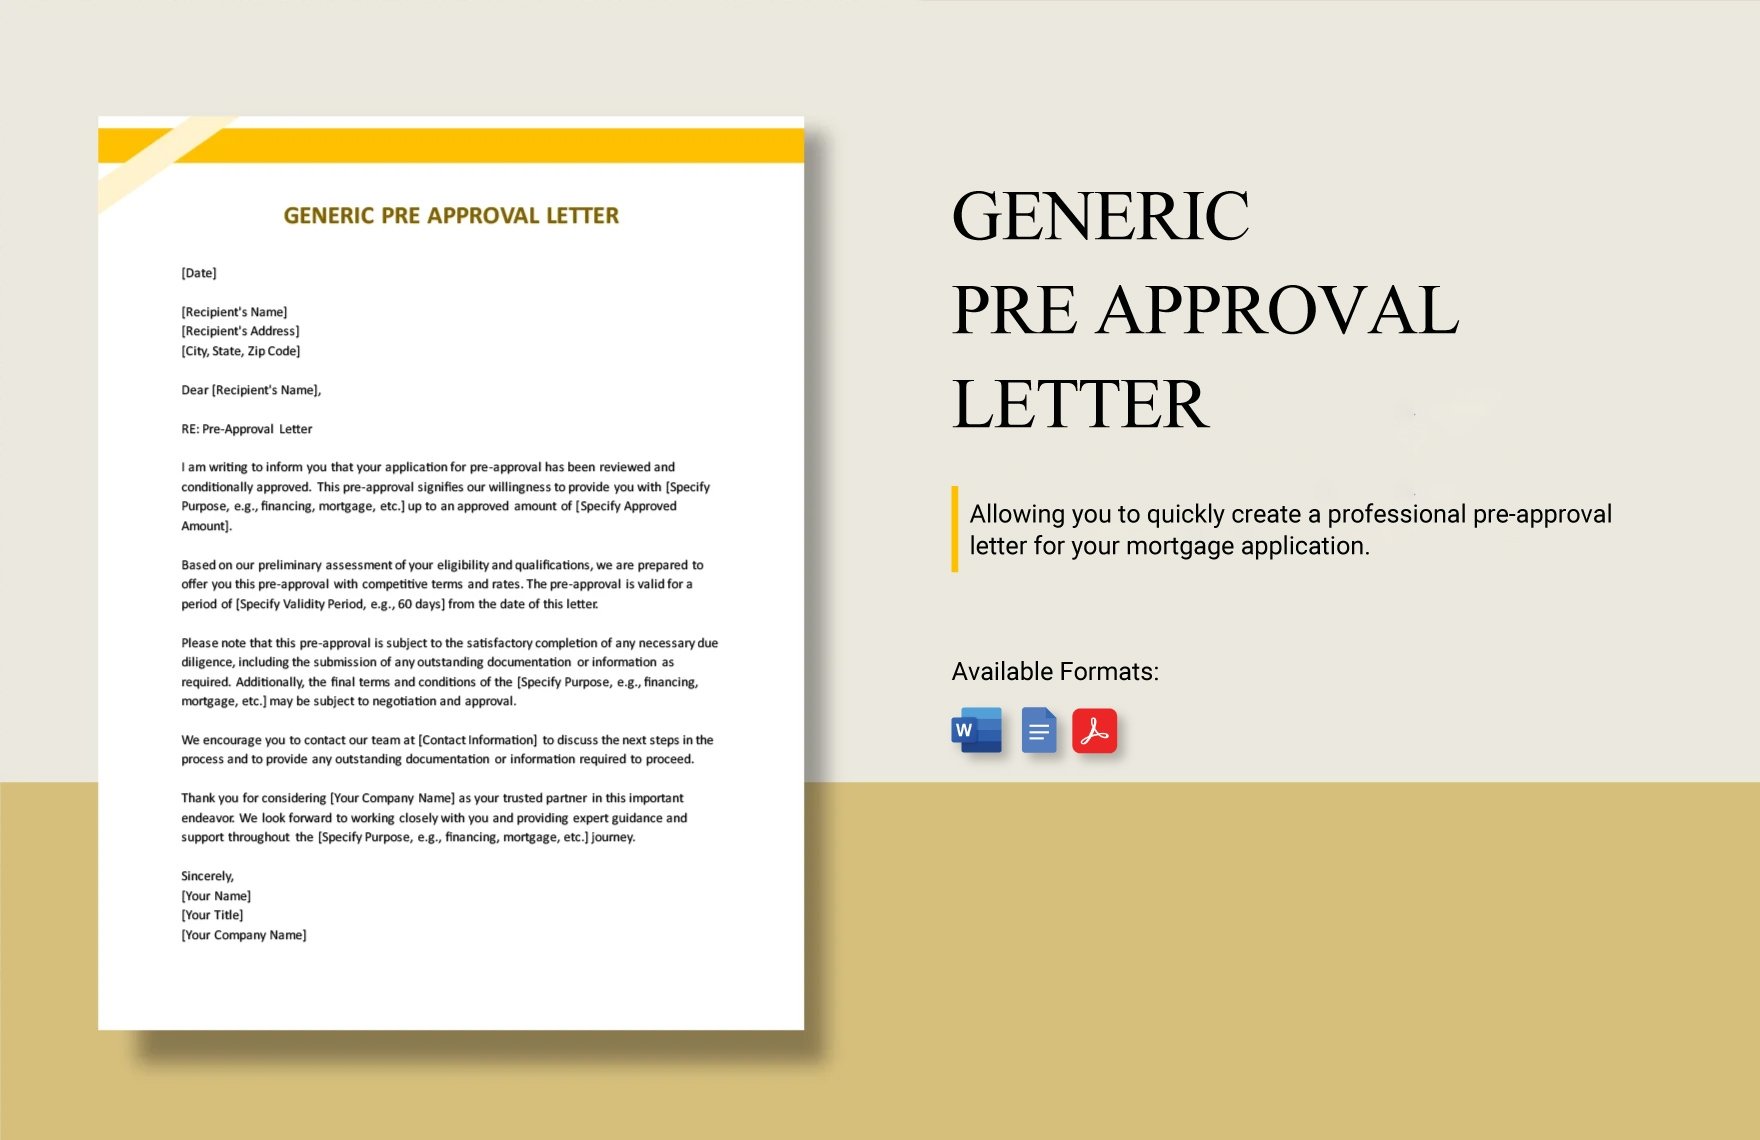 Generic Pre Approval Letter in Word, Google Docs, PDF